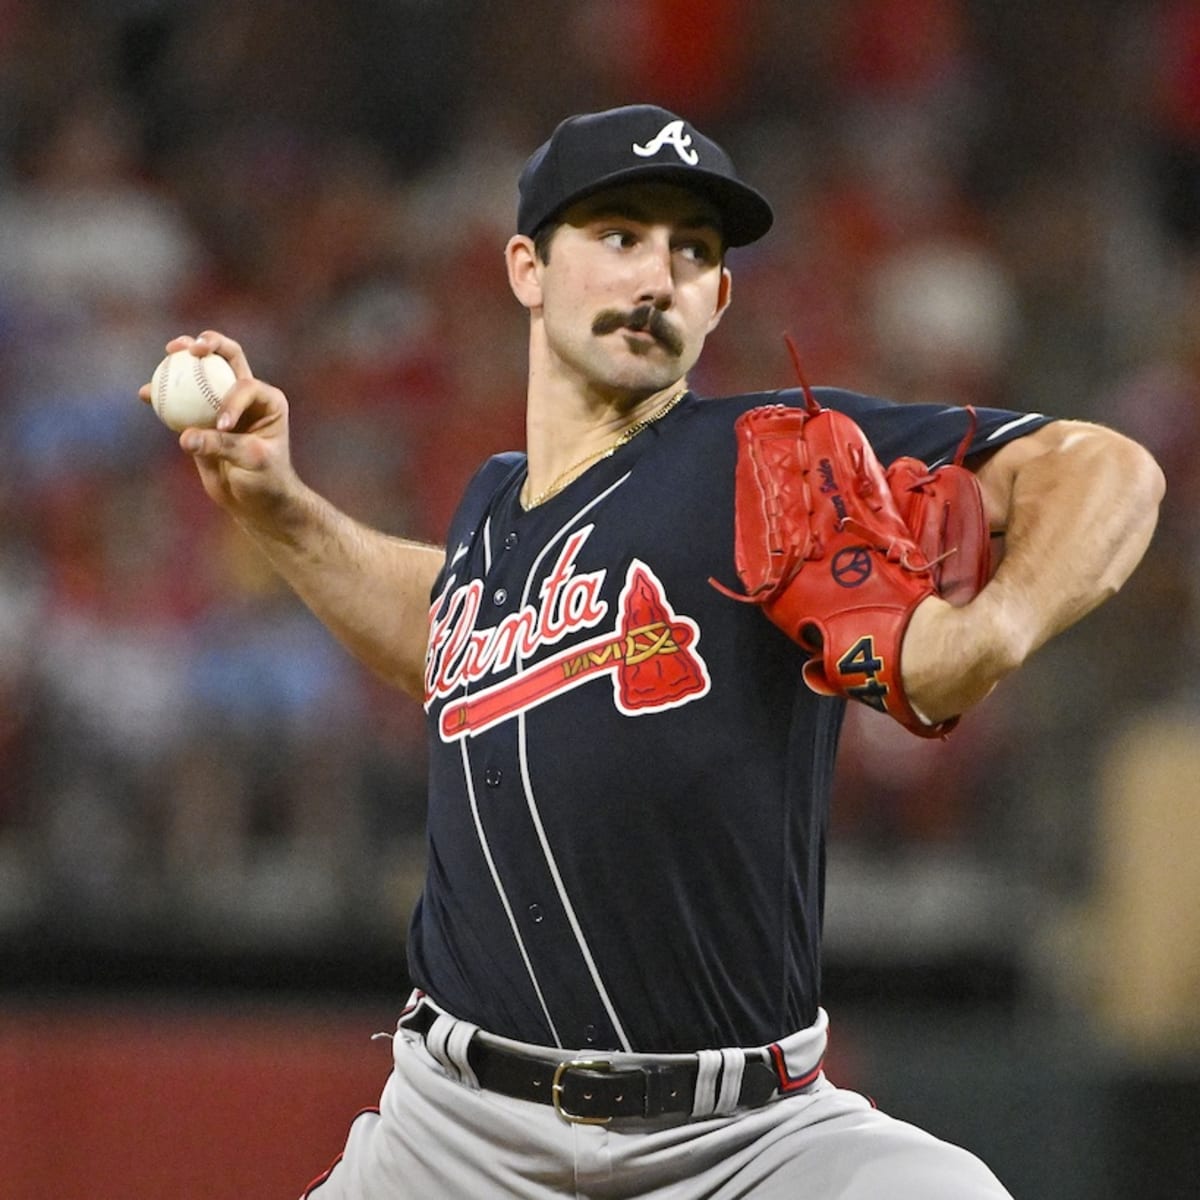 Braves Pitcher Spencer Strider Limits Another Divisional Leader to One Run  - Sports Illustrated Clemson Tigers News, Analysis and More